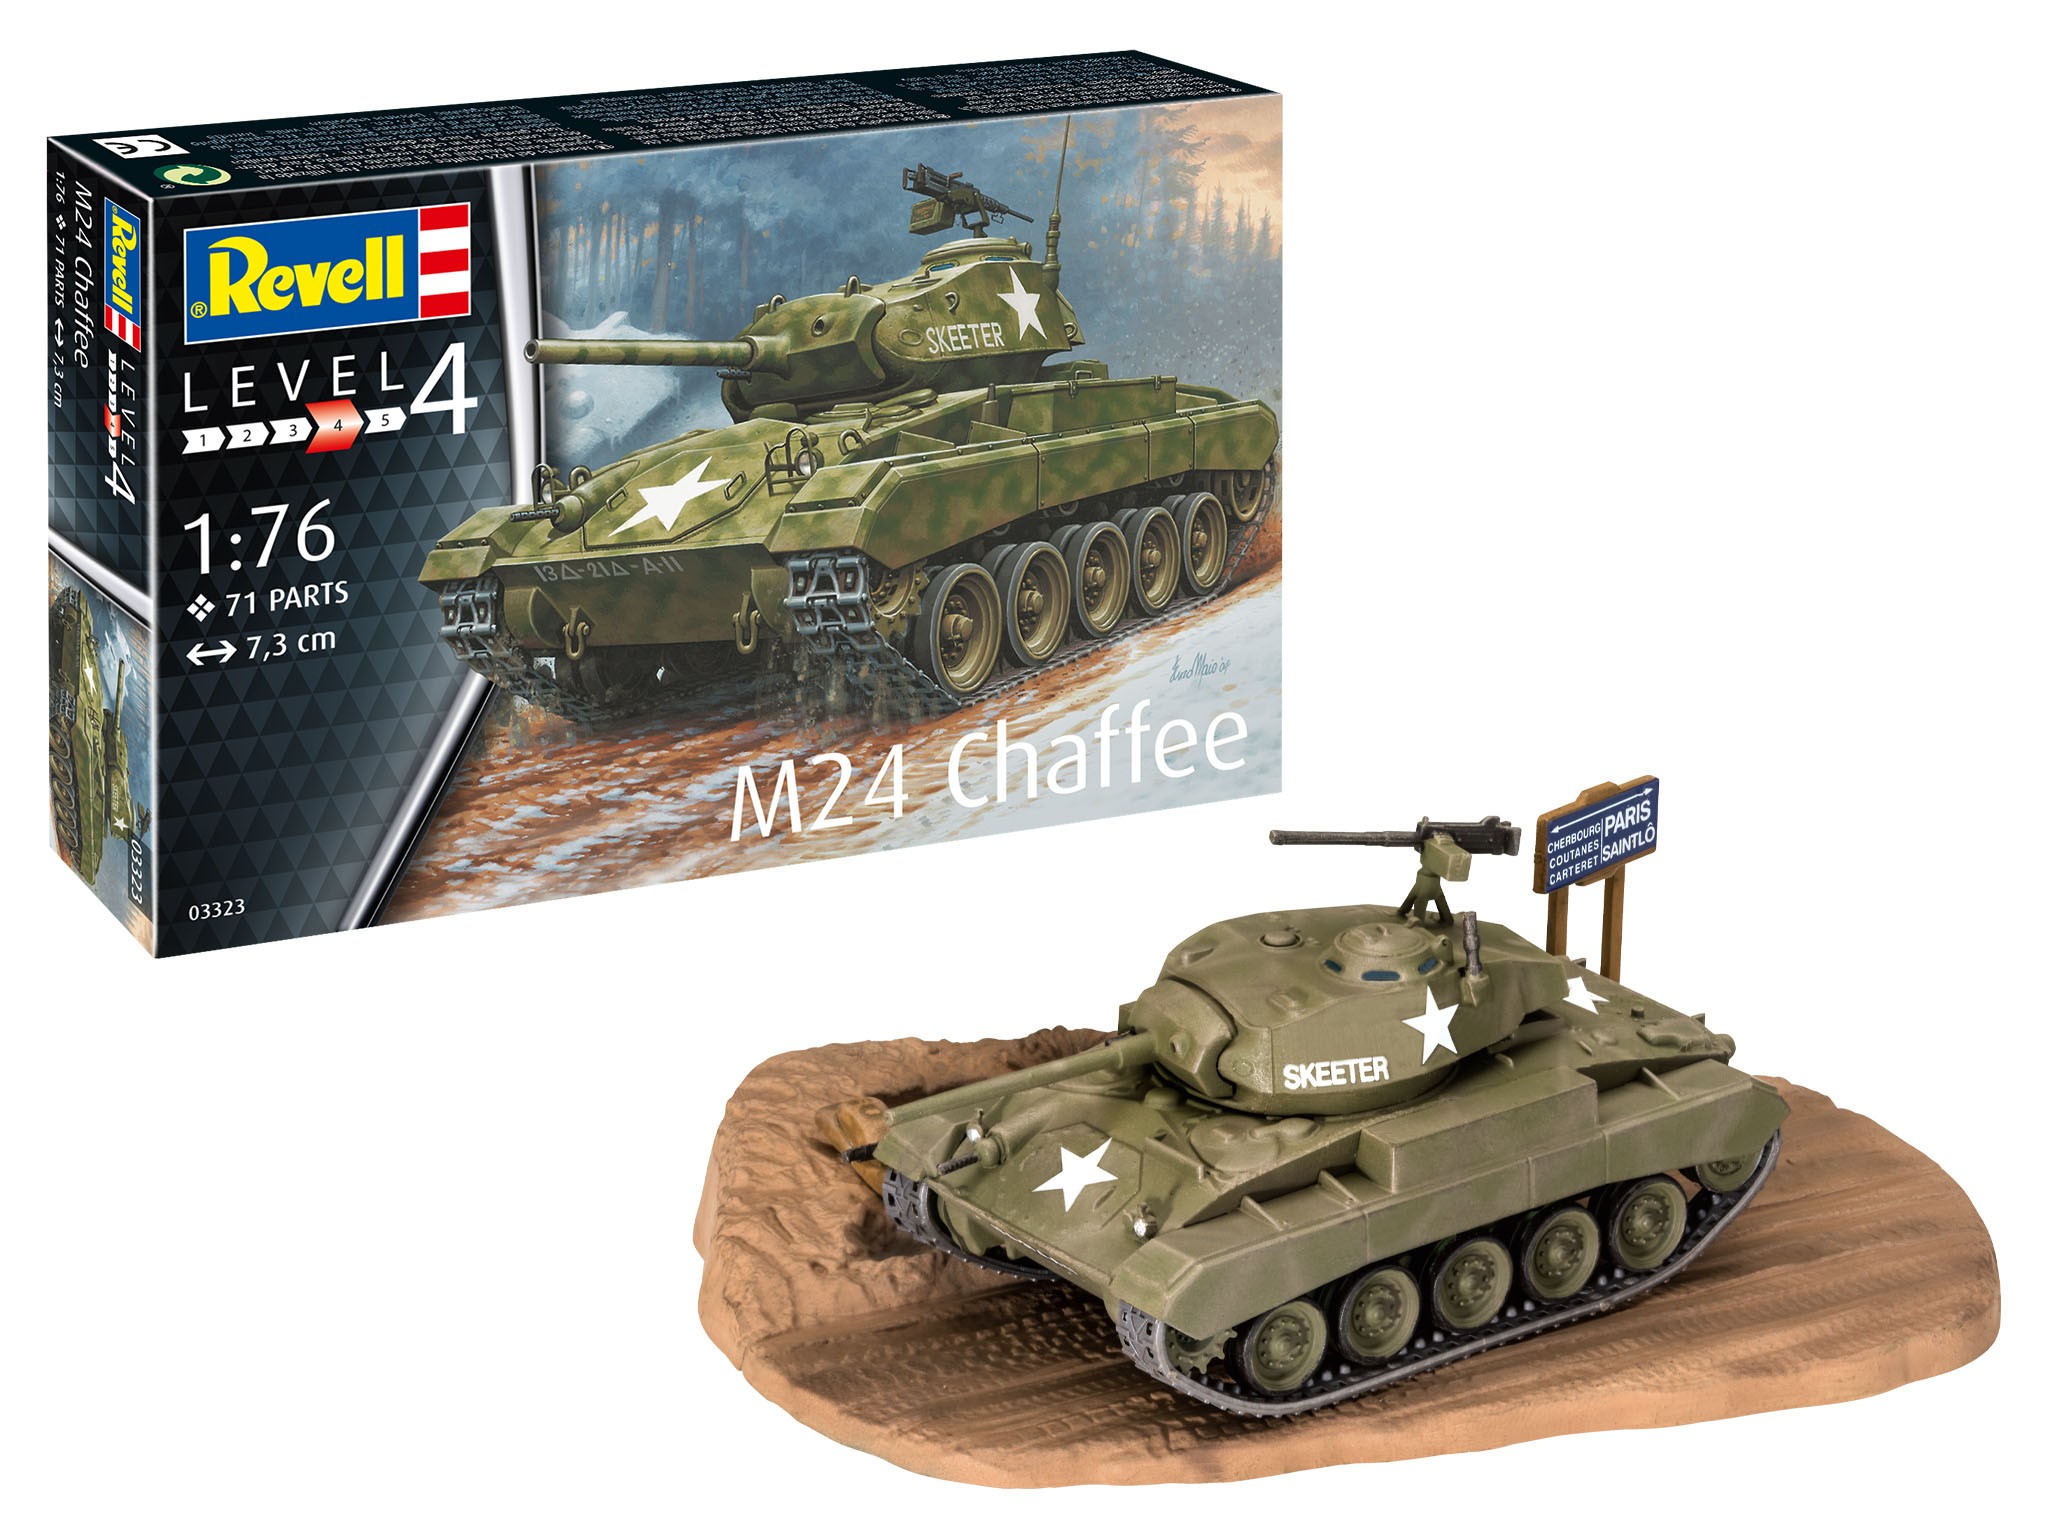 Maquette Revell M24 CHAFFEE- 1/76 - Maquette militaire